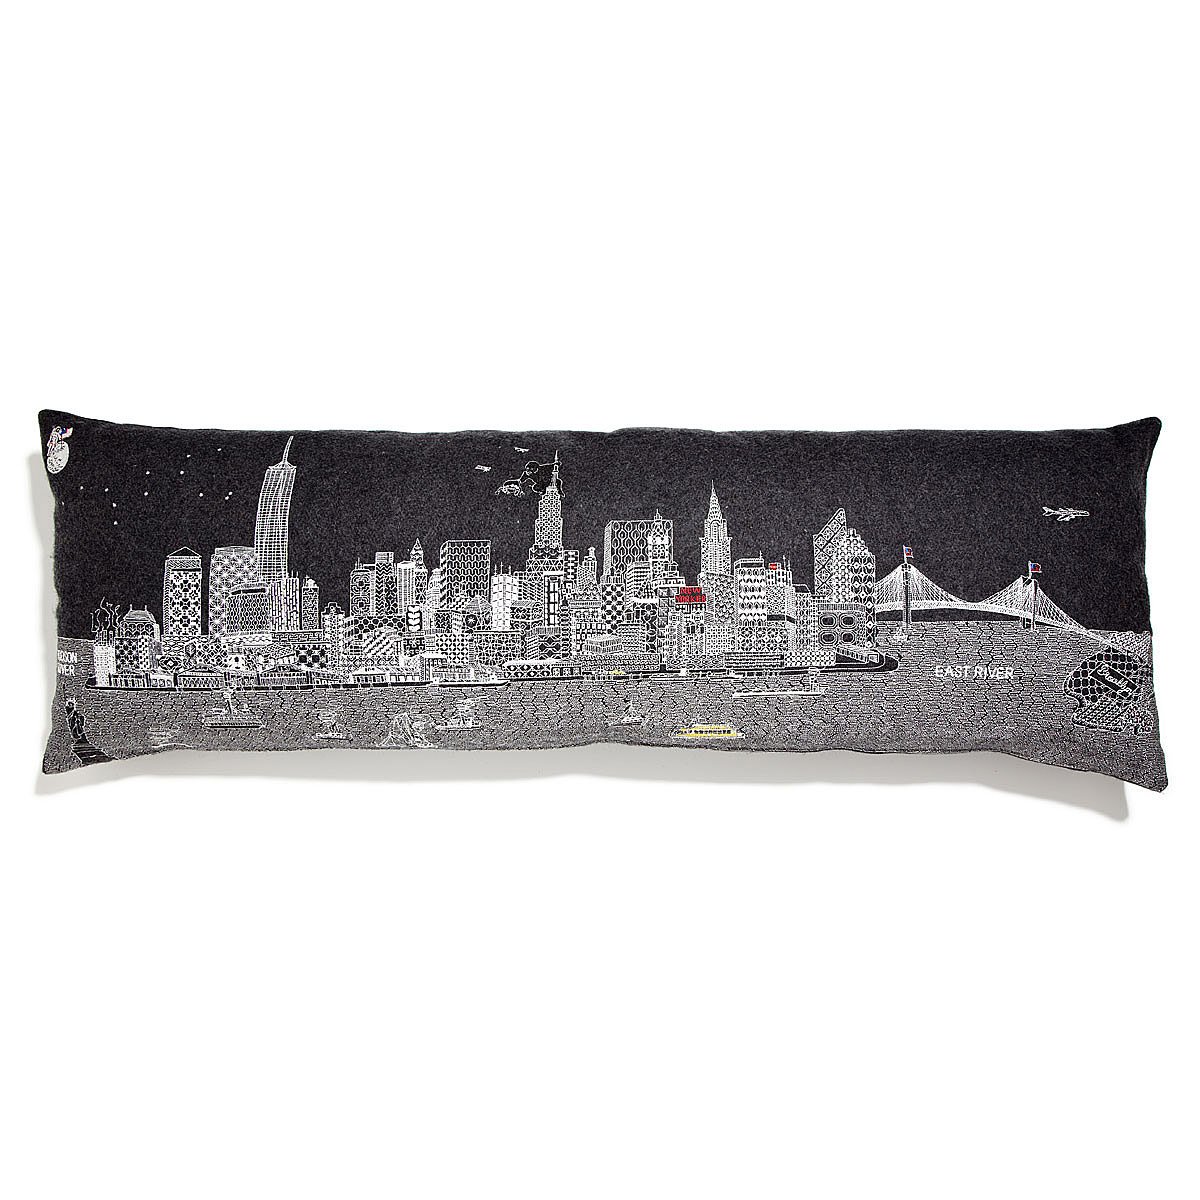 NYC Skyline Pillows | new york city, empire state building, embroidered ...